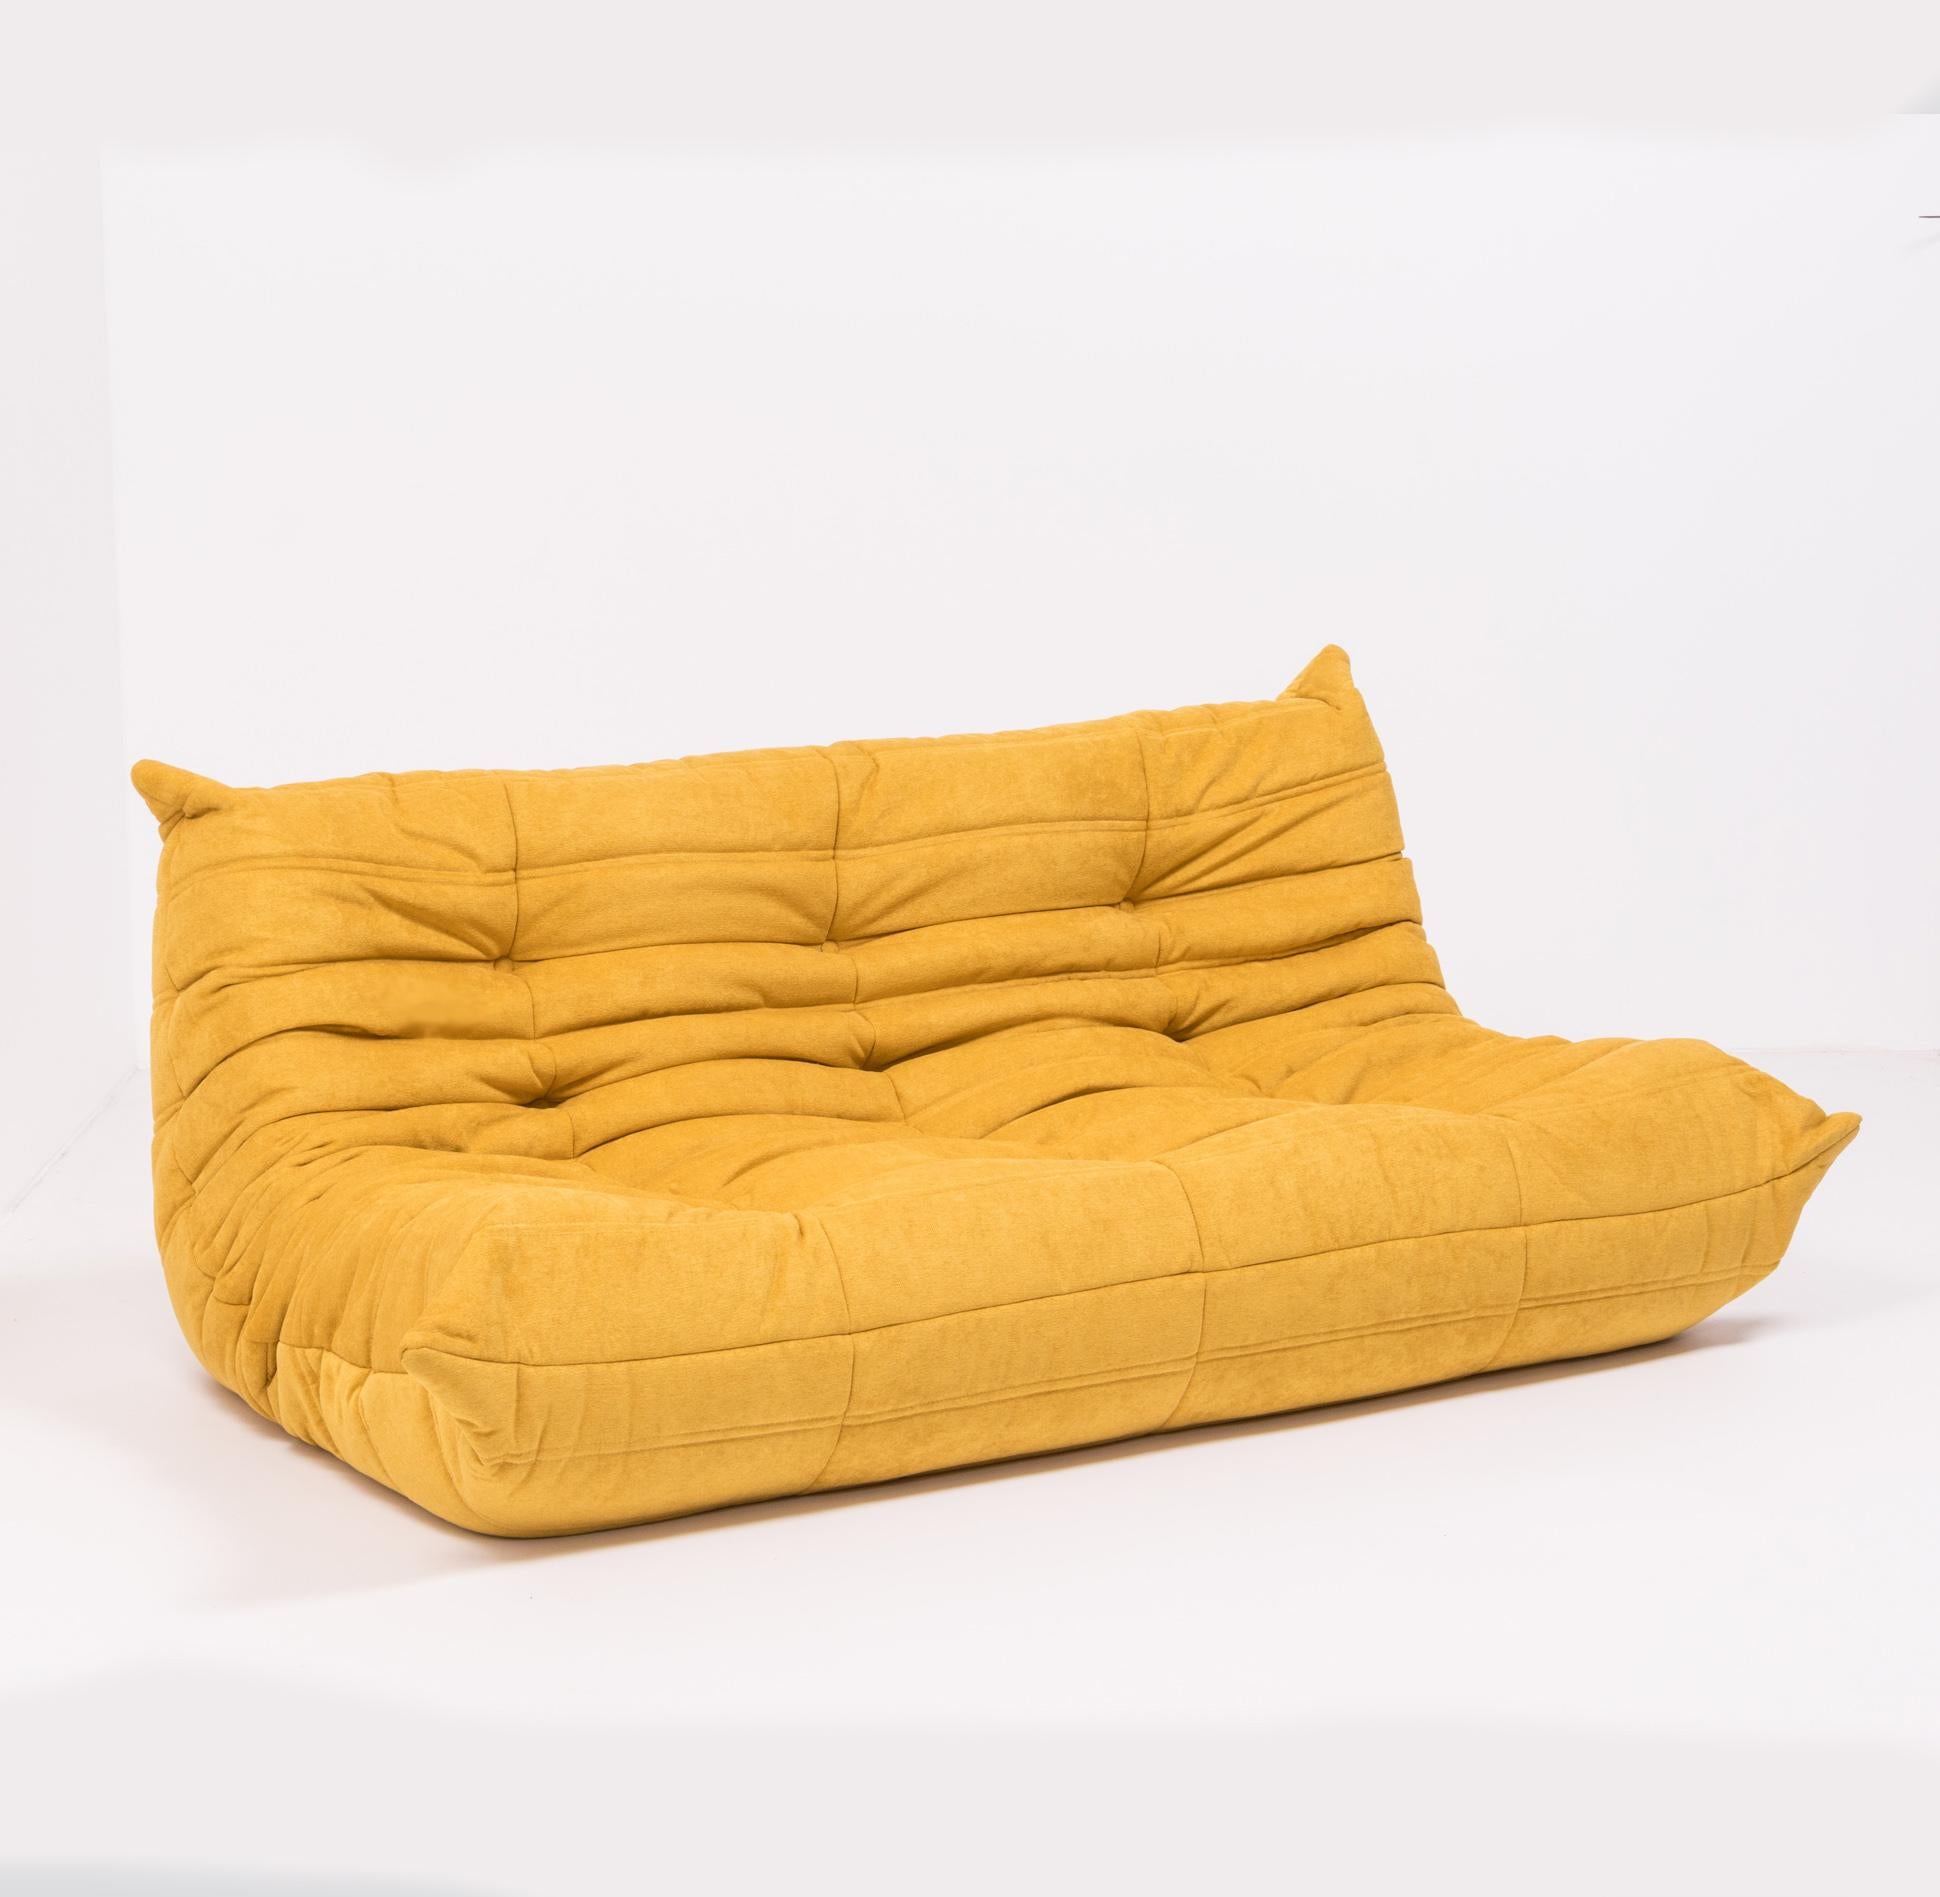 The iconic Togo sofa, originally designed by Michael Ducaroy for Ligne Roset in 1973, has become a design classic.
 
This large 3-seat model has been newly and completely reupholstered in marigold yellow Liberto fabric which can be spot cleaned